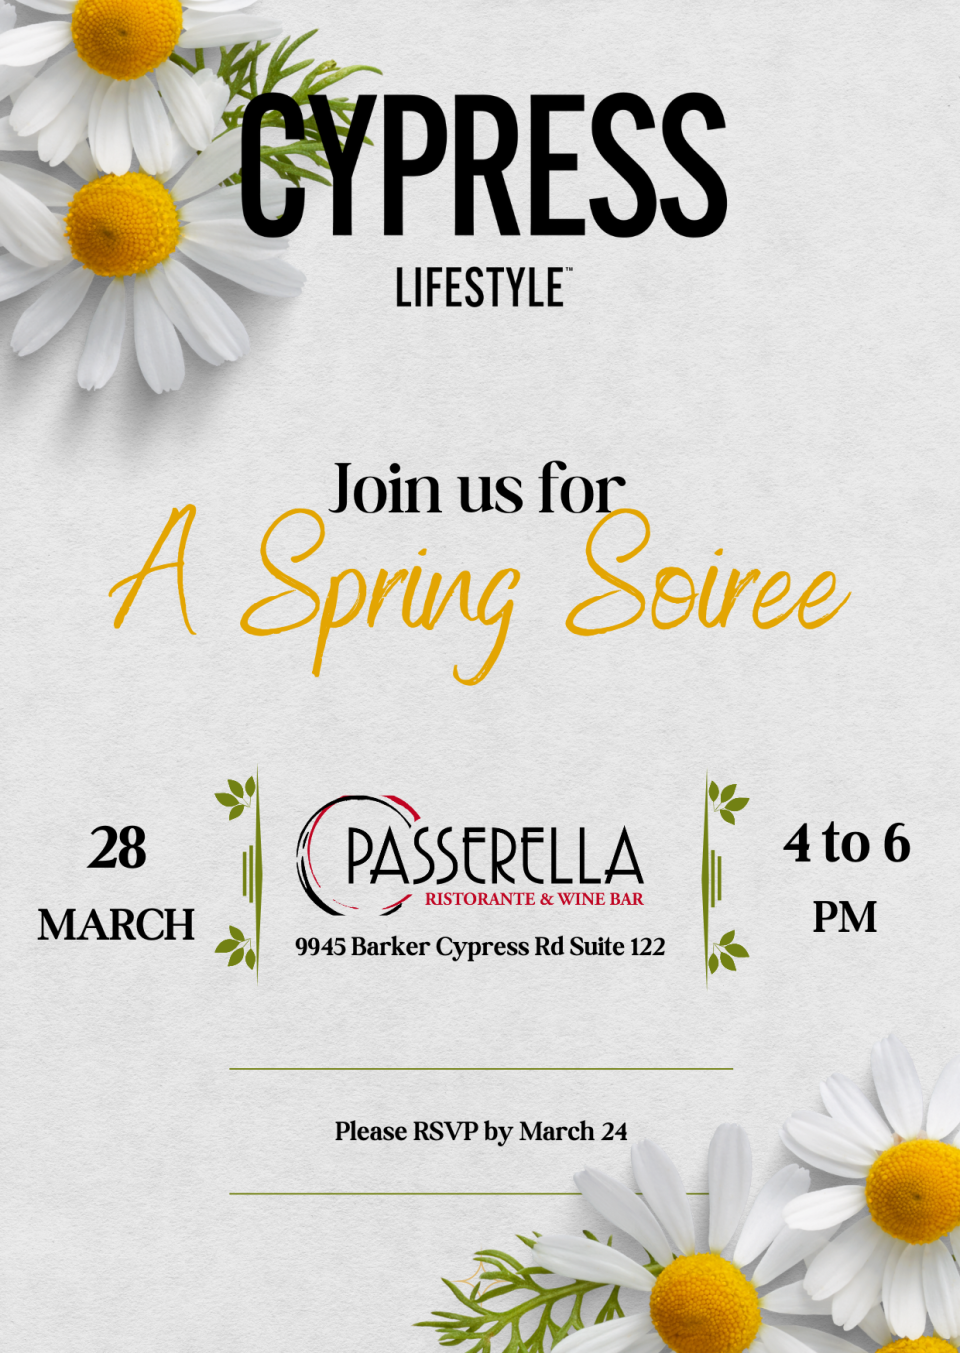 Hi Everyone! I tried to send this invitation to everyone in the group but in case I missed you...join us for a Spring networking event at Passerella on March 25! RSVP at https://bit.ly/42fzmHM by March 24.